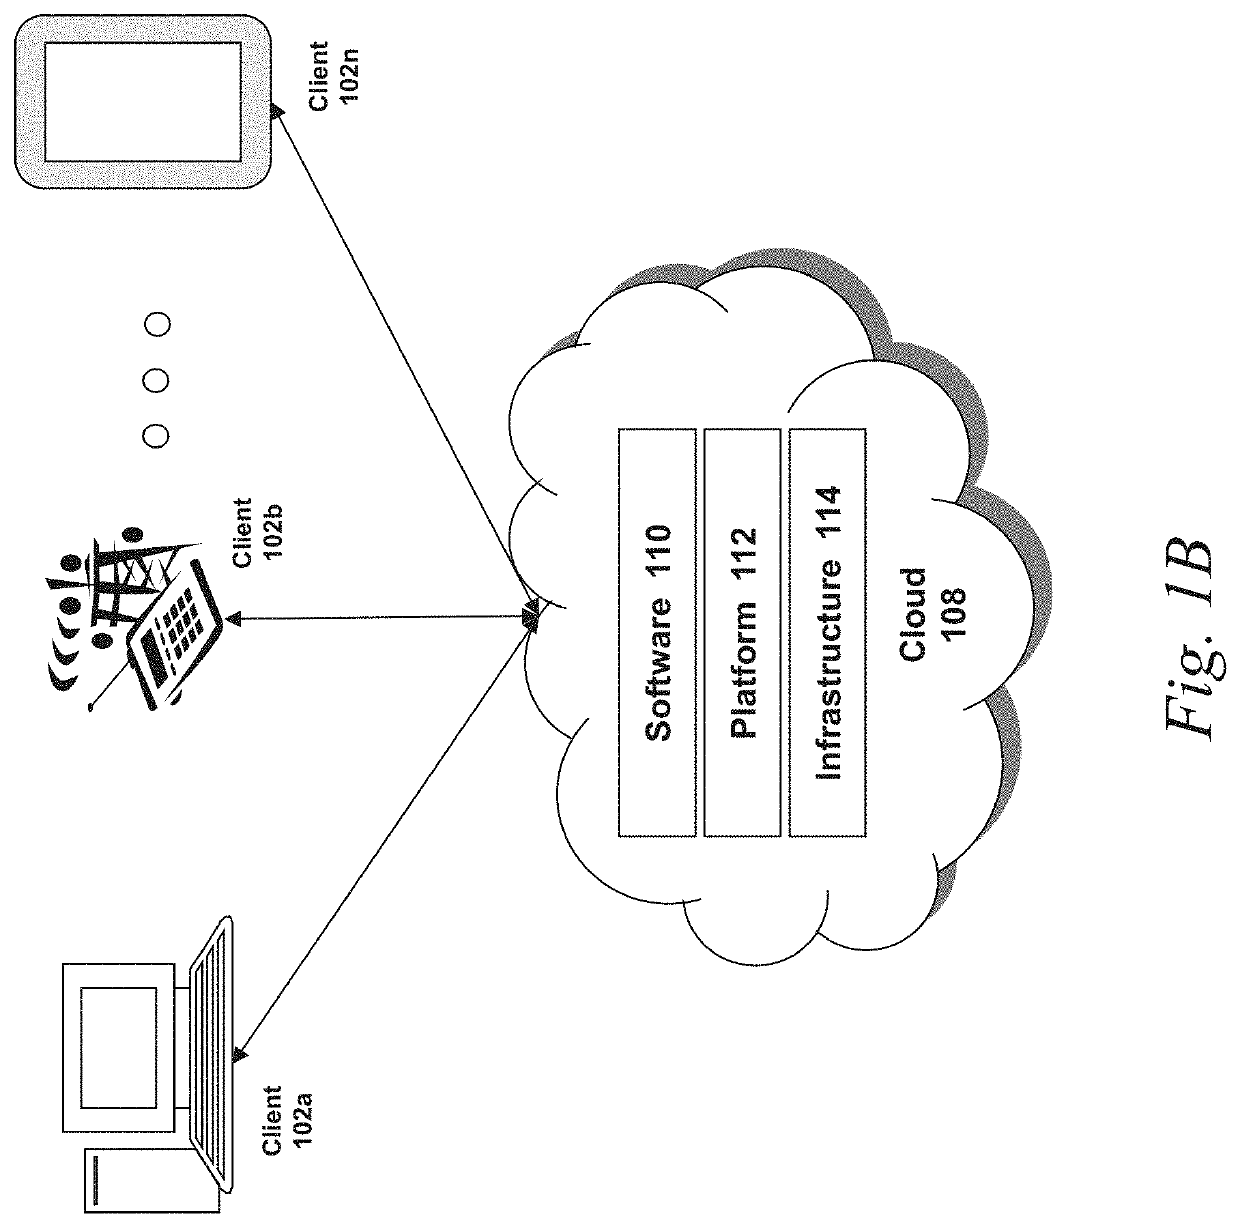 Fraud detection and control in multi-tiered centralized processing